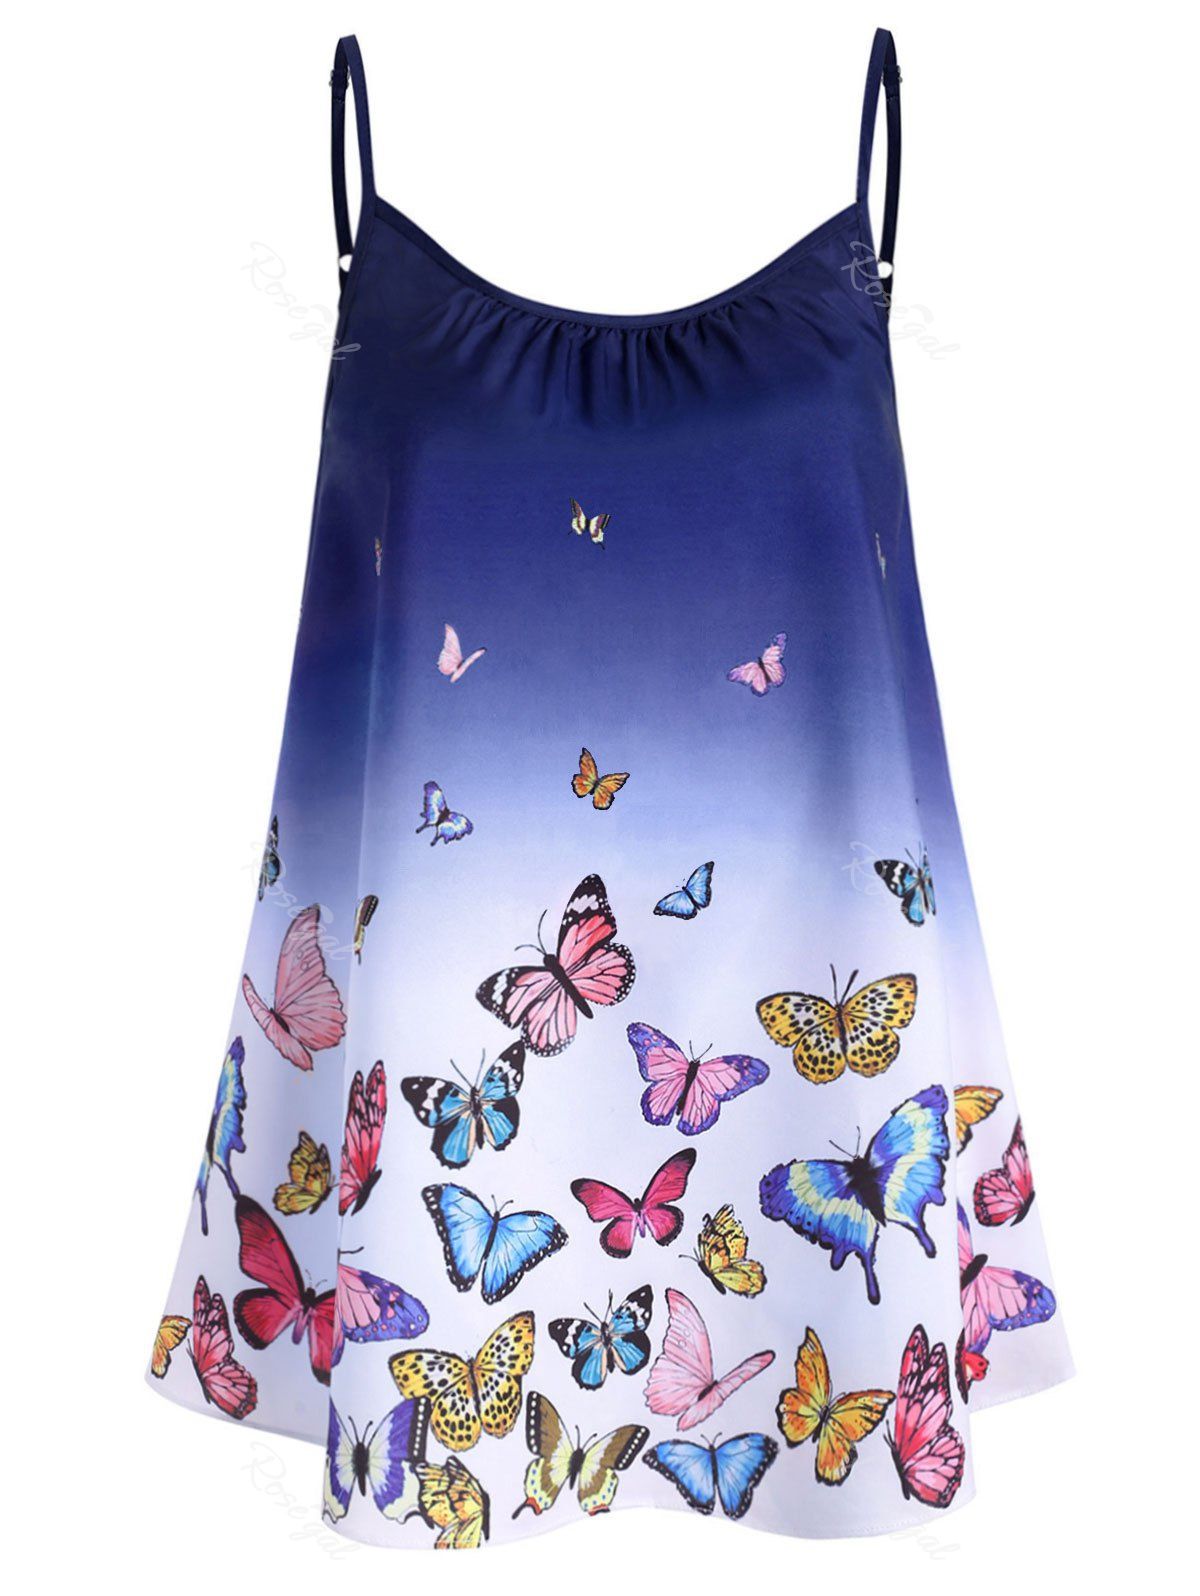 Chic Plus Size Ombre Butterfly Print Cami Top  